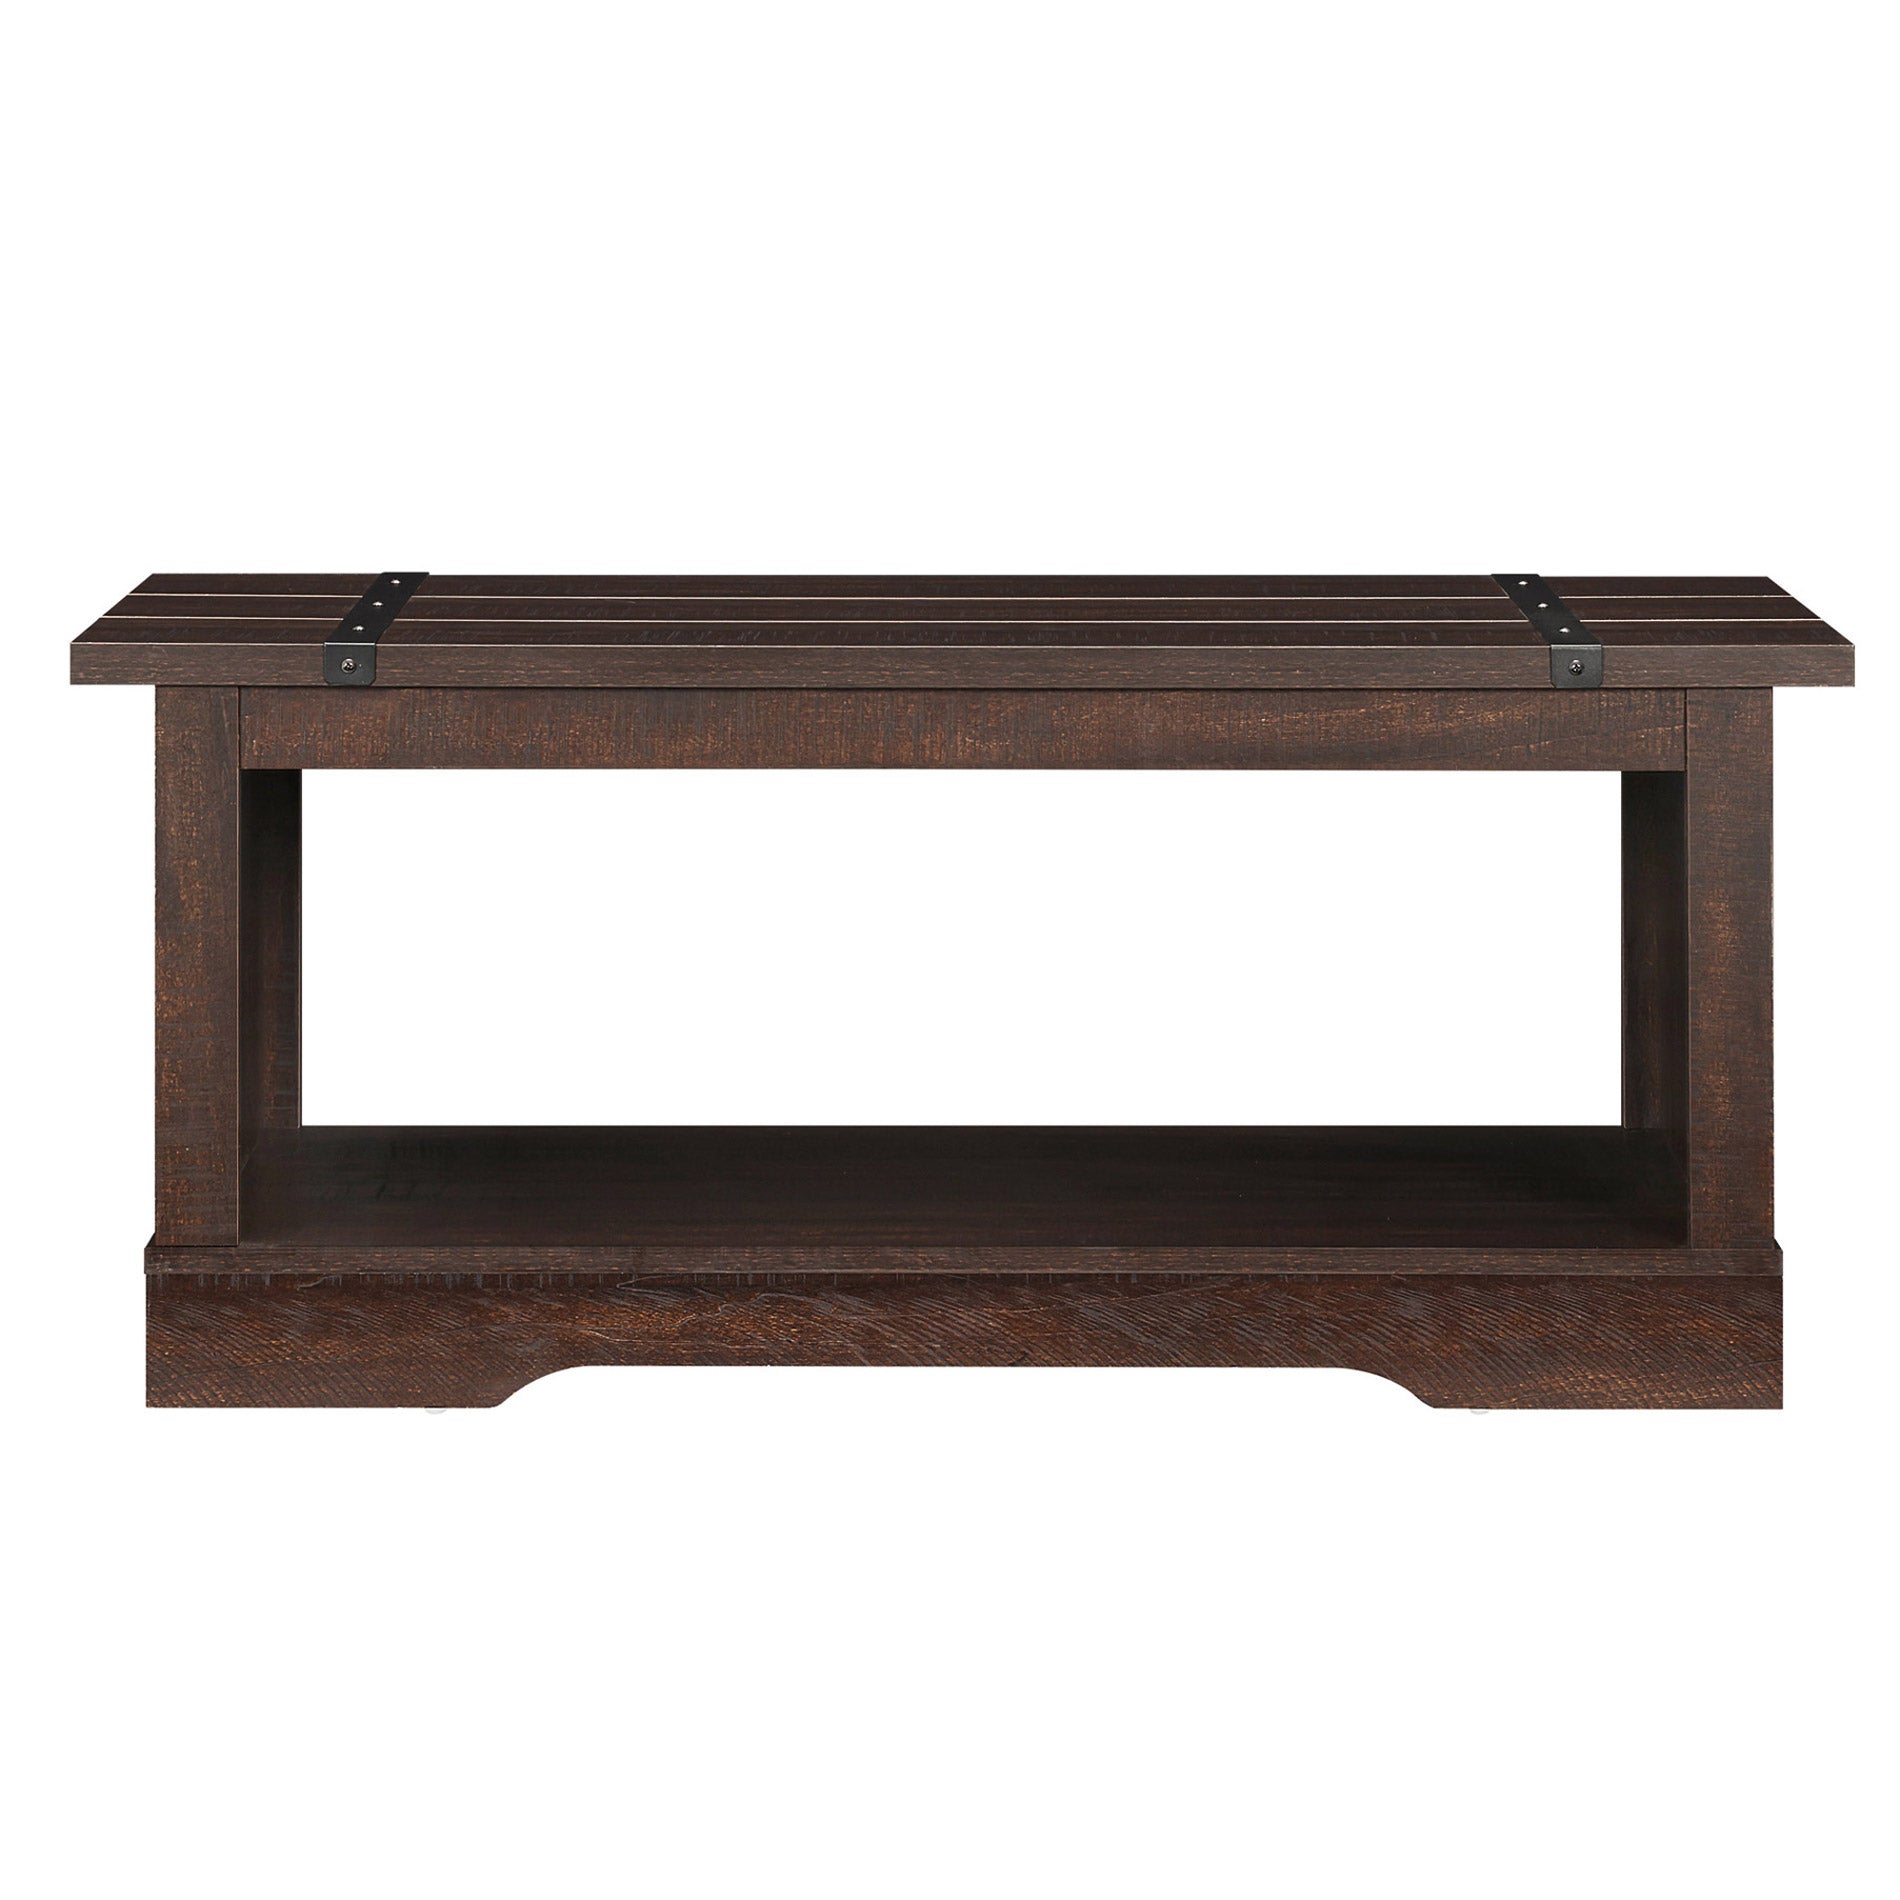 WAMPAT 42" Modern Farmhouse Coffee Table with Open Storage for Living Room, Rustic Brown